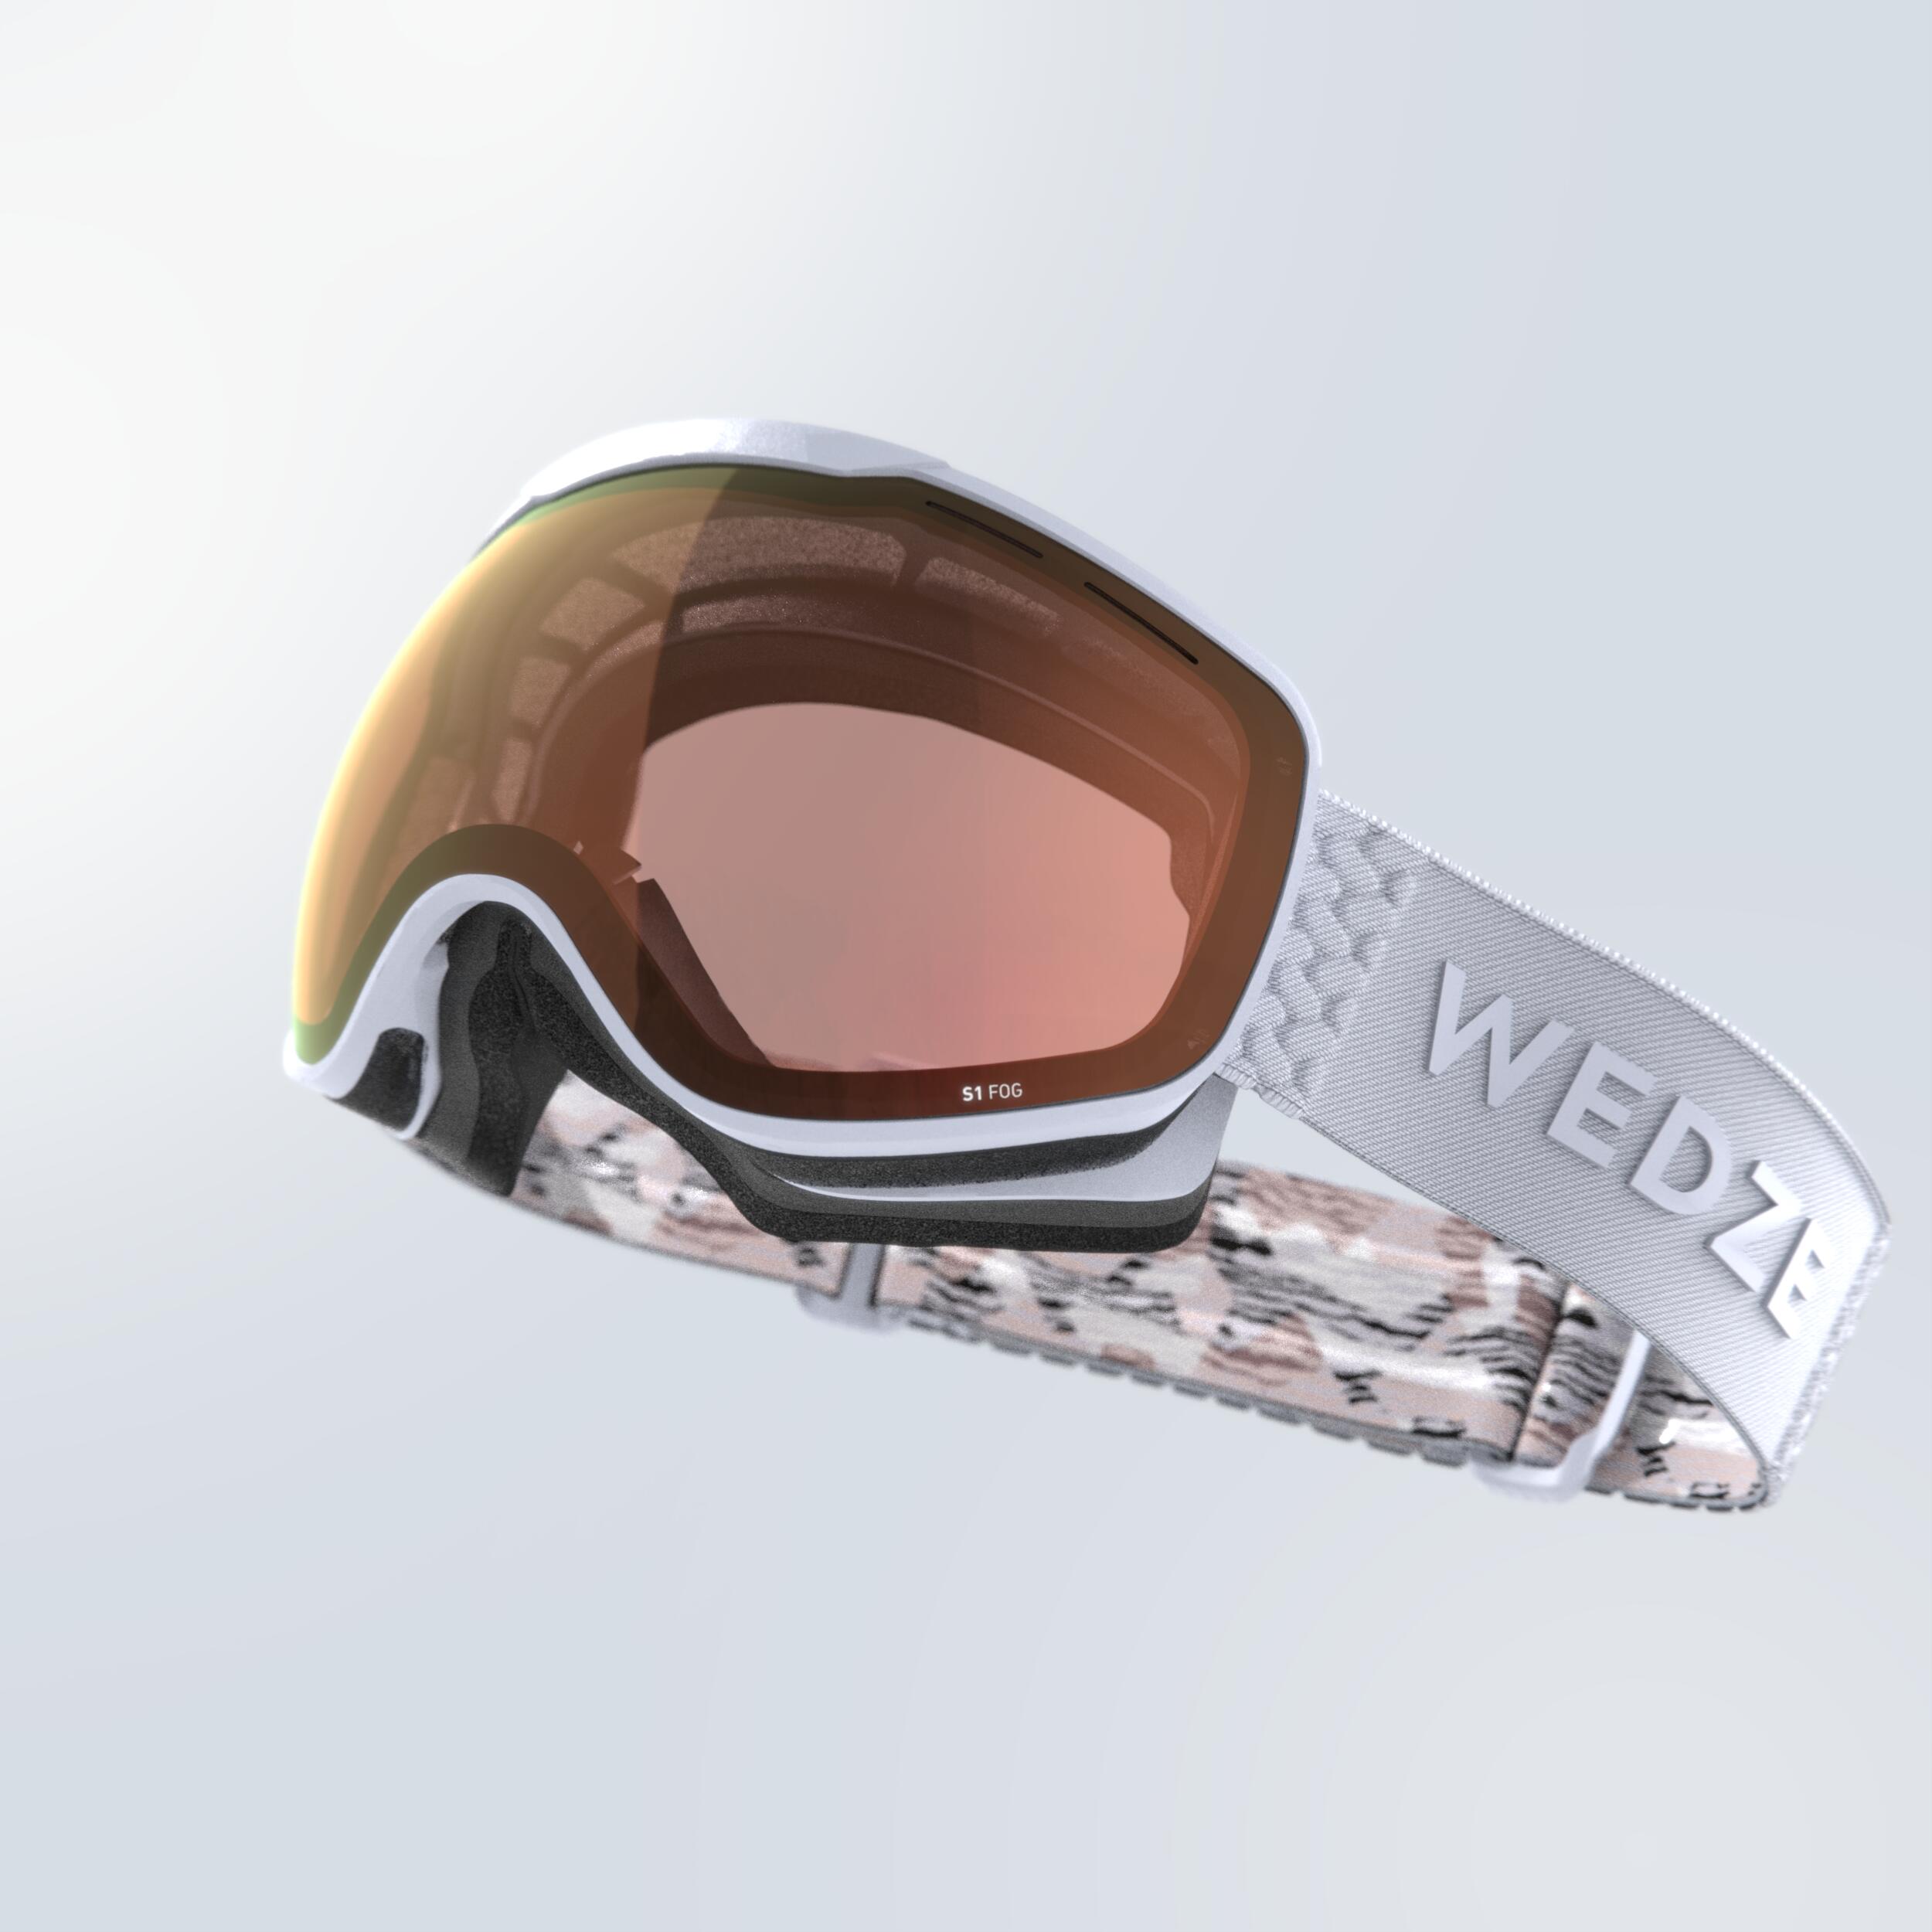 WEDZE KIDS’ AND ADULTS’ BAD WEATHER SKIING GOGGLES - G 900 S1 - LIGHT PURPLE